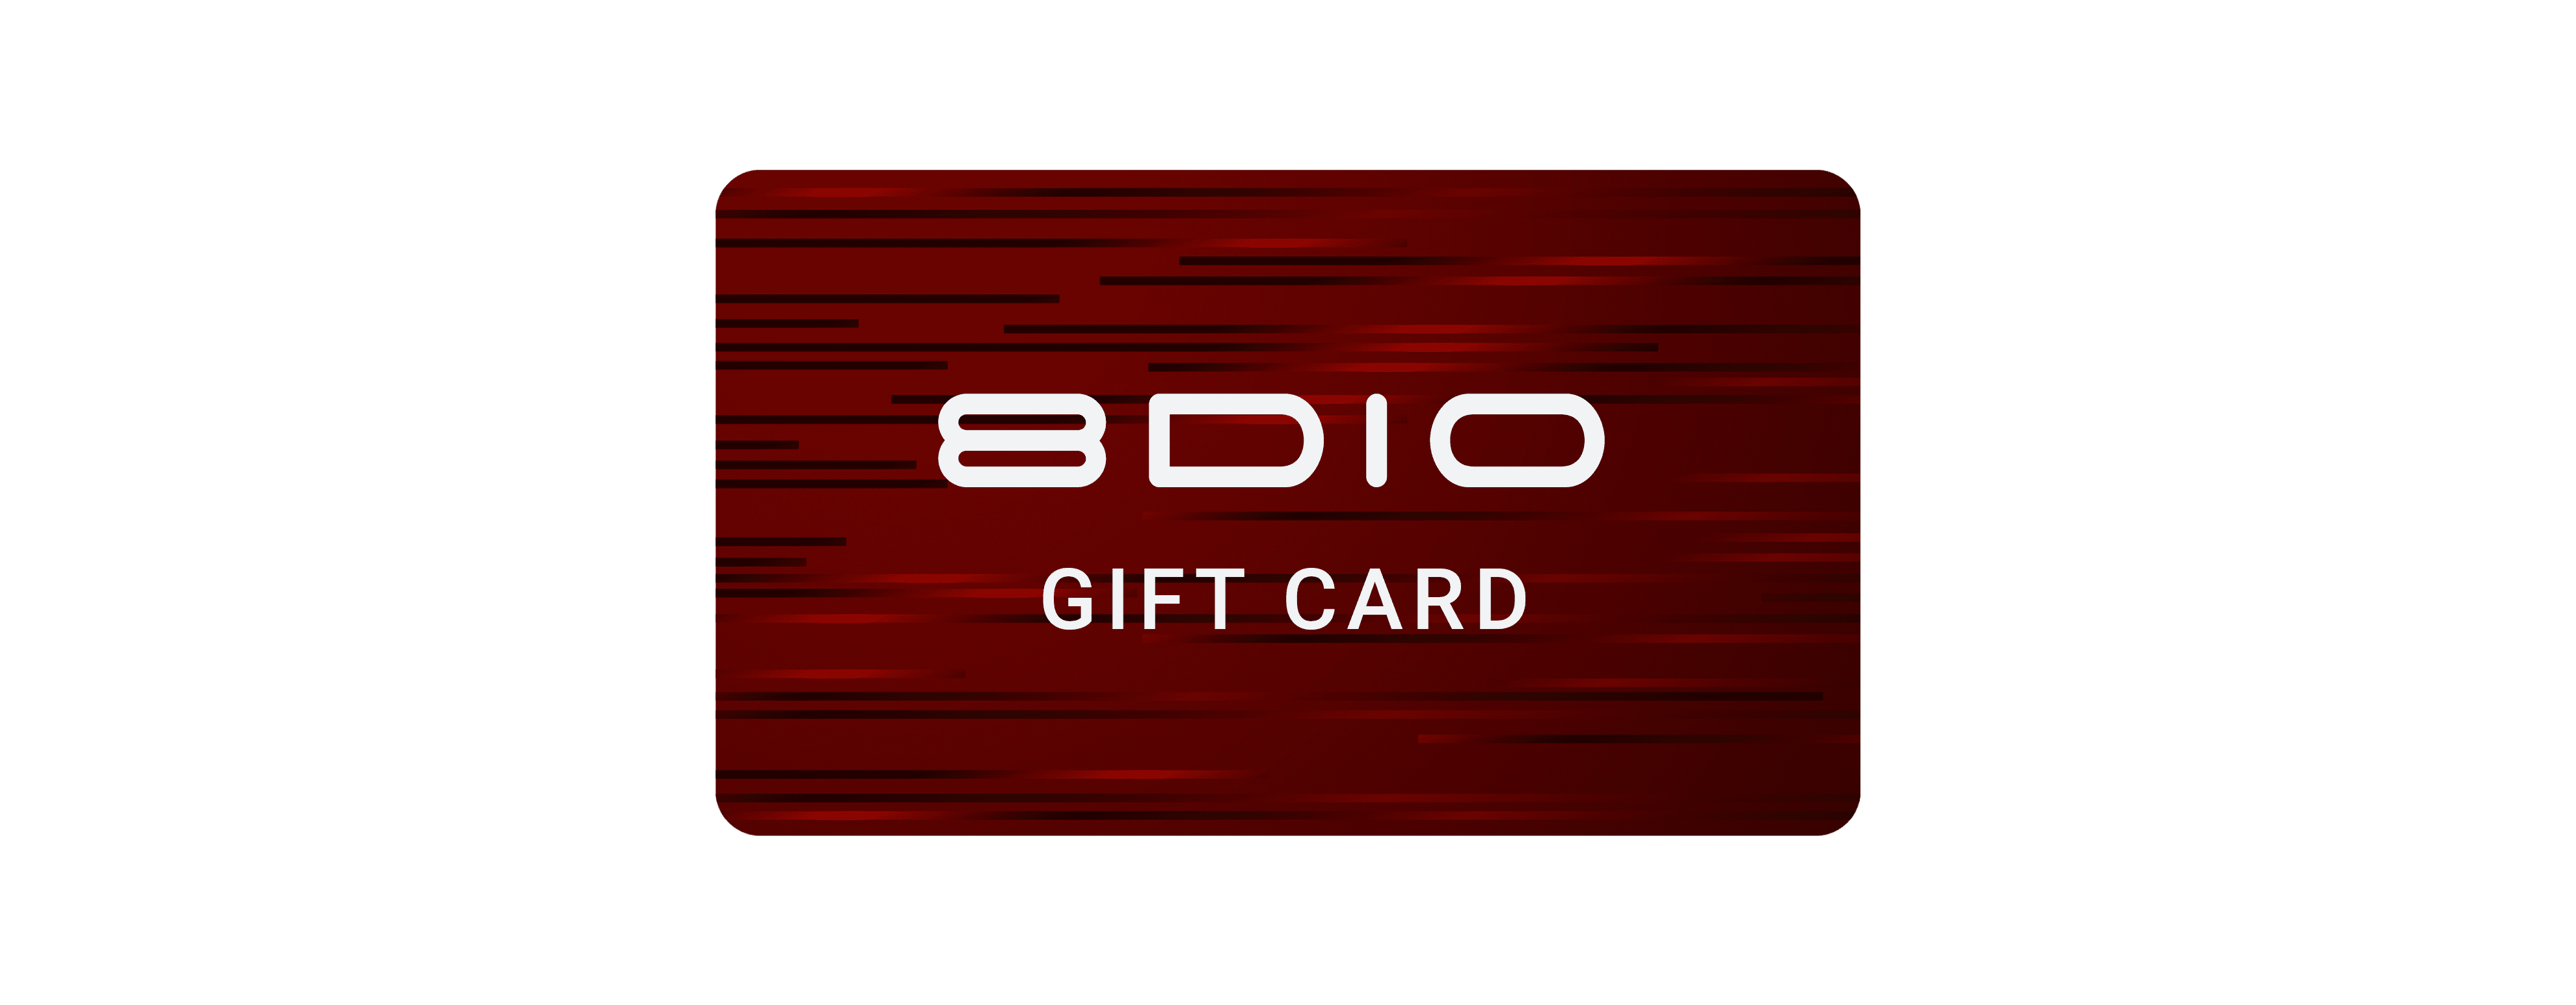 8Dio Gift Card